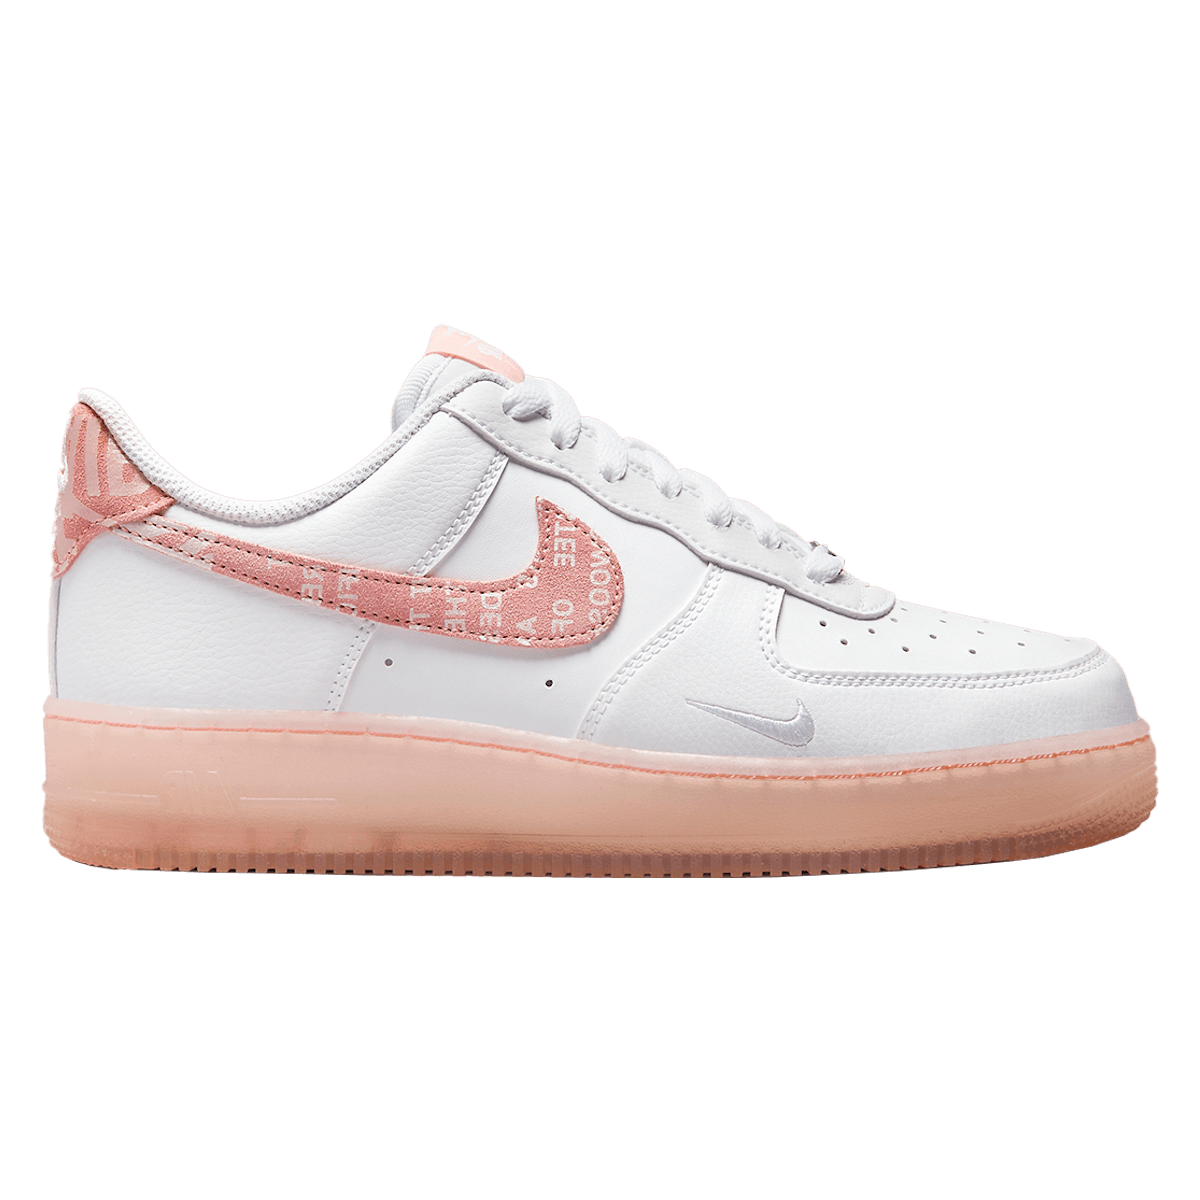 Nike Air Force 1 Overbranded "White Pink"